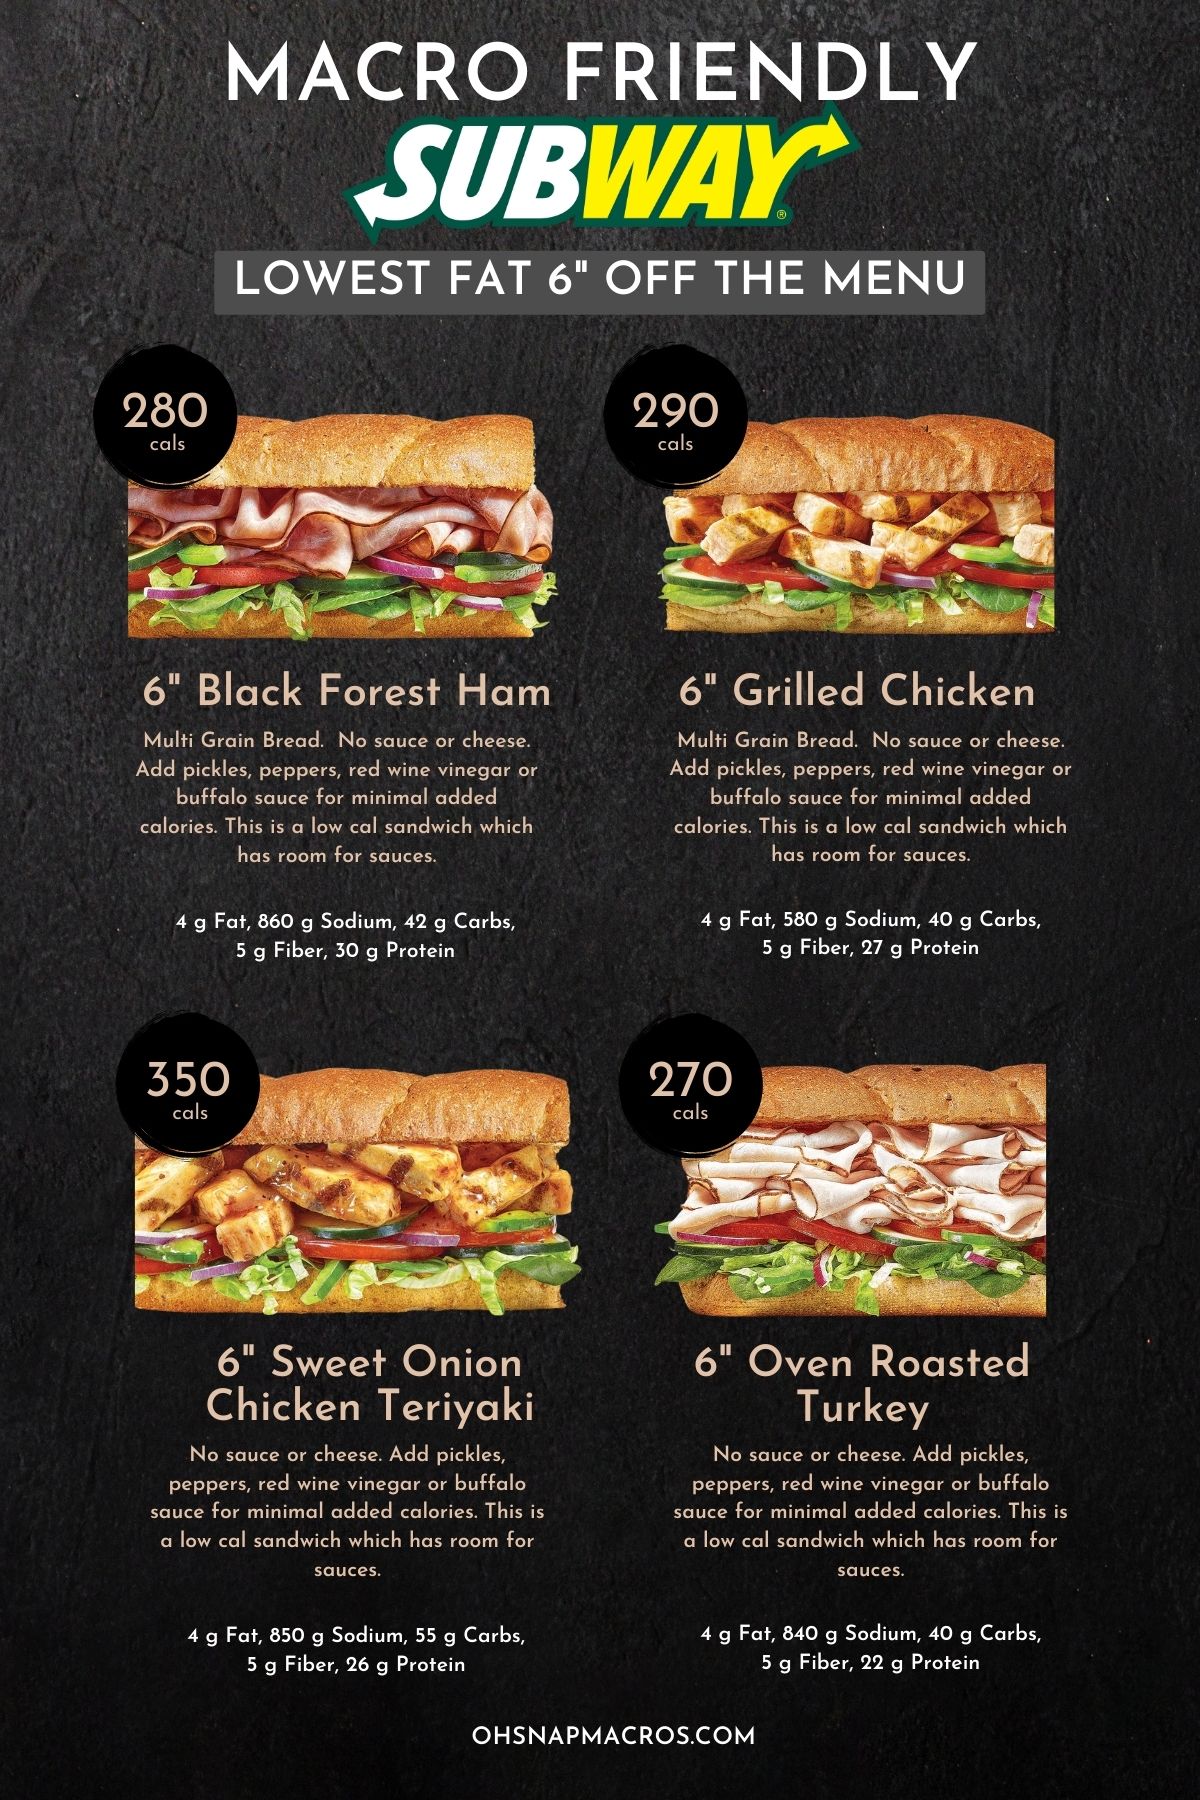 Graphic of the lowest fat six inch subs: black forest ham, grilled chicken, sweety onion chicken teriyaki, and oven-roasted turkey.